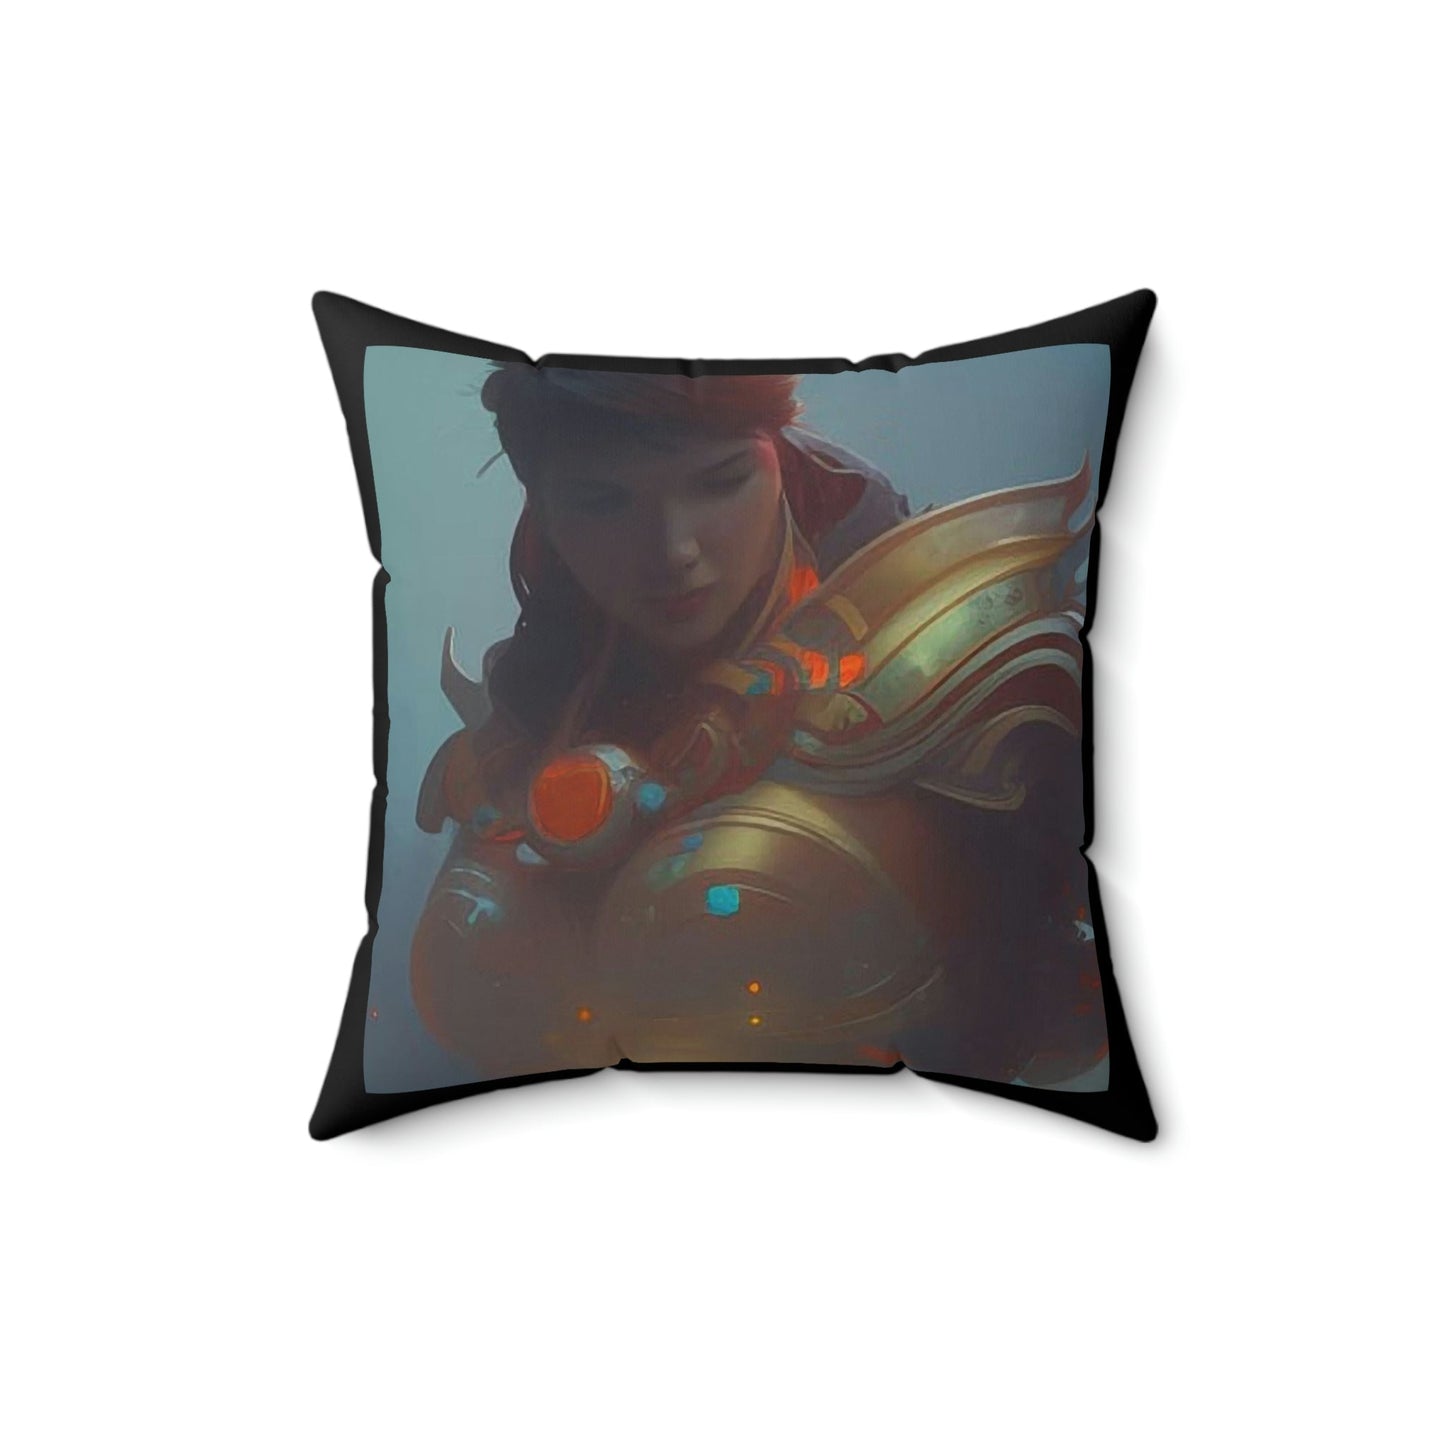 Stay Weird VI Square Pillow